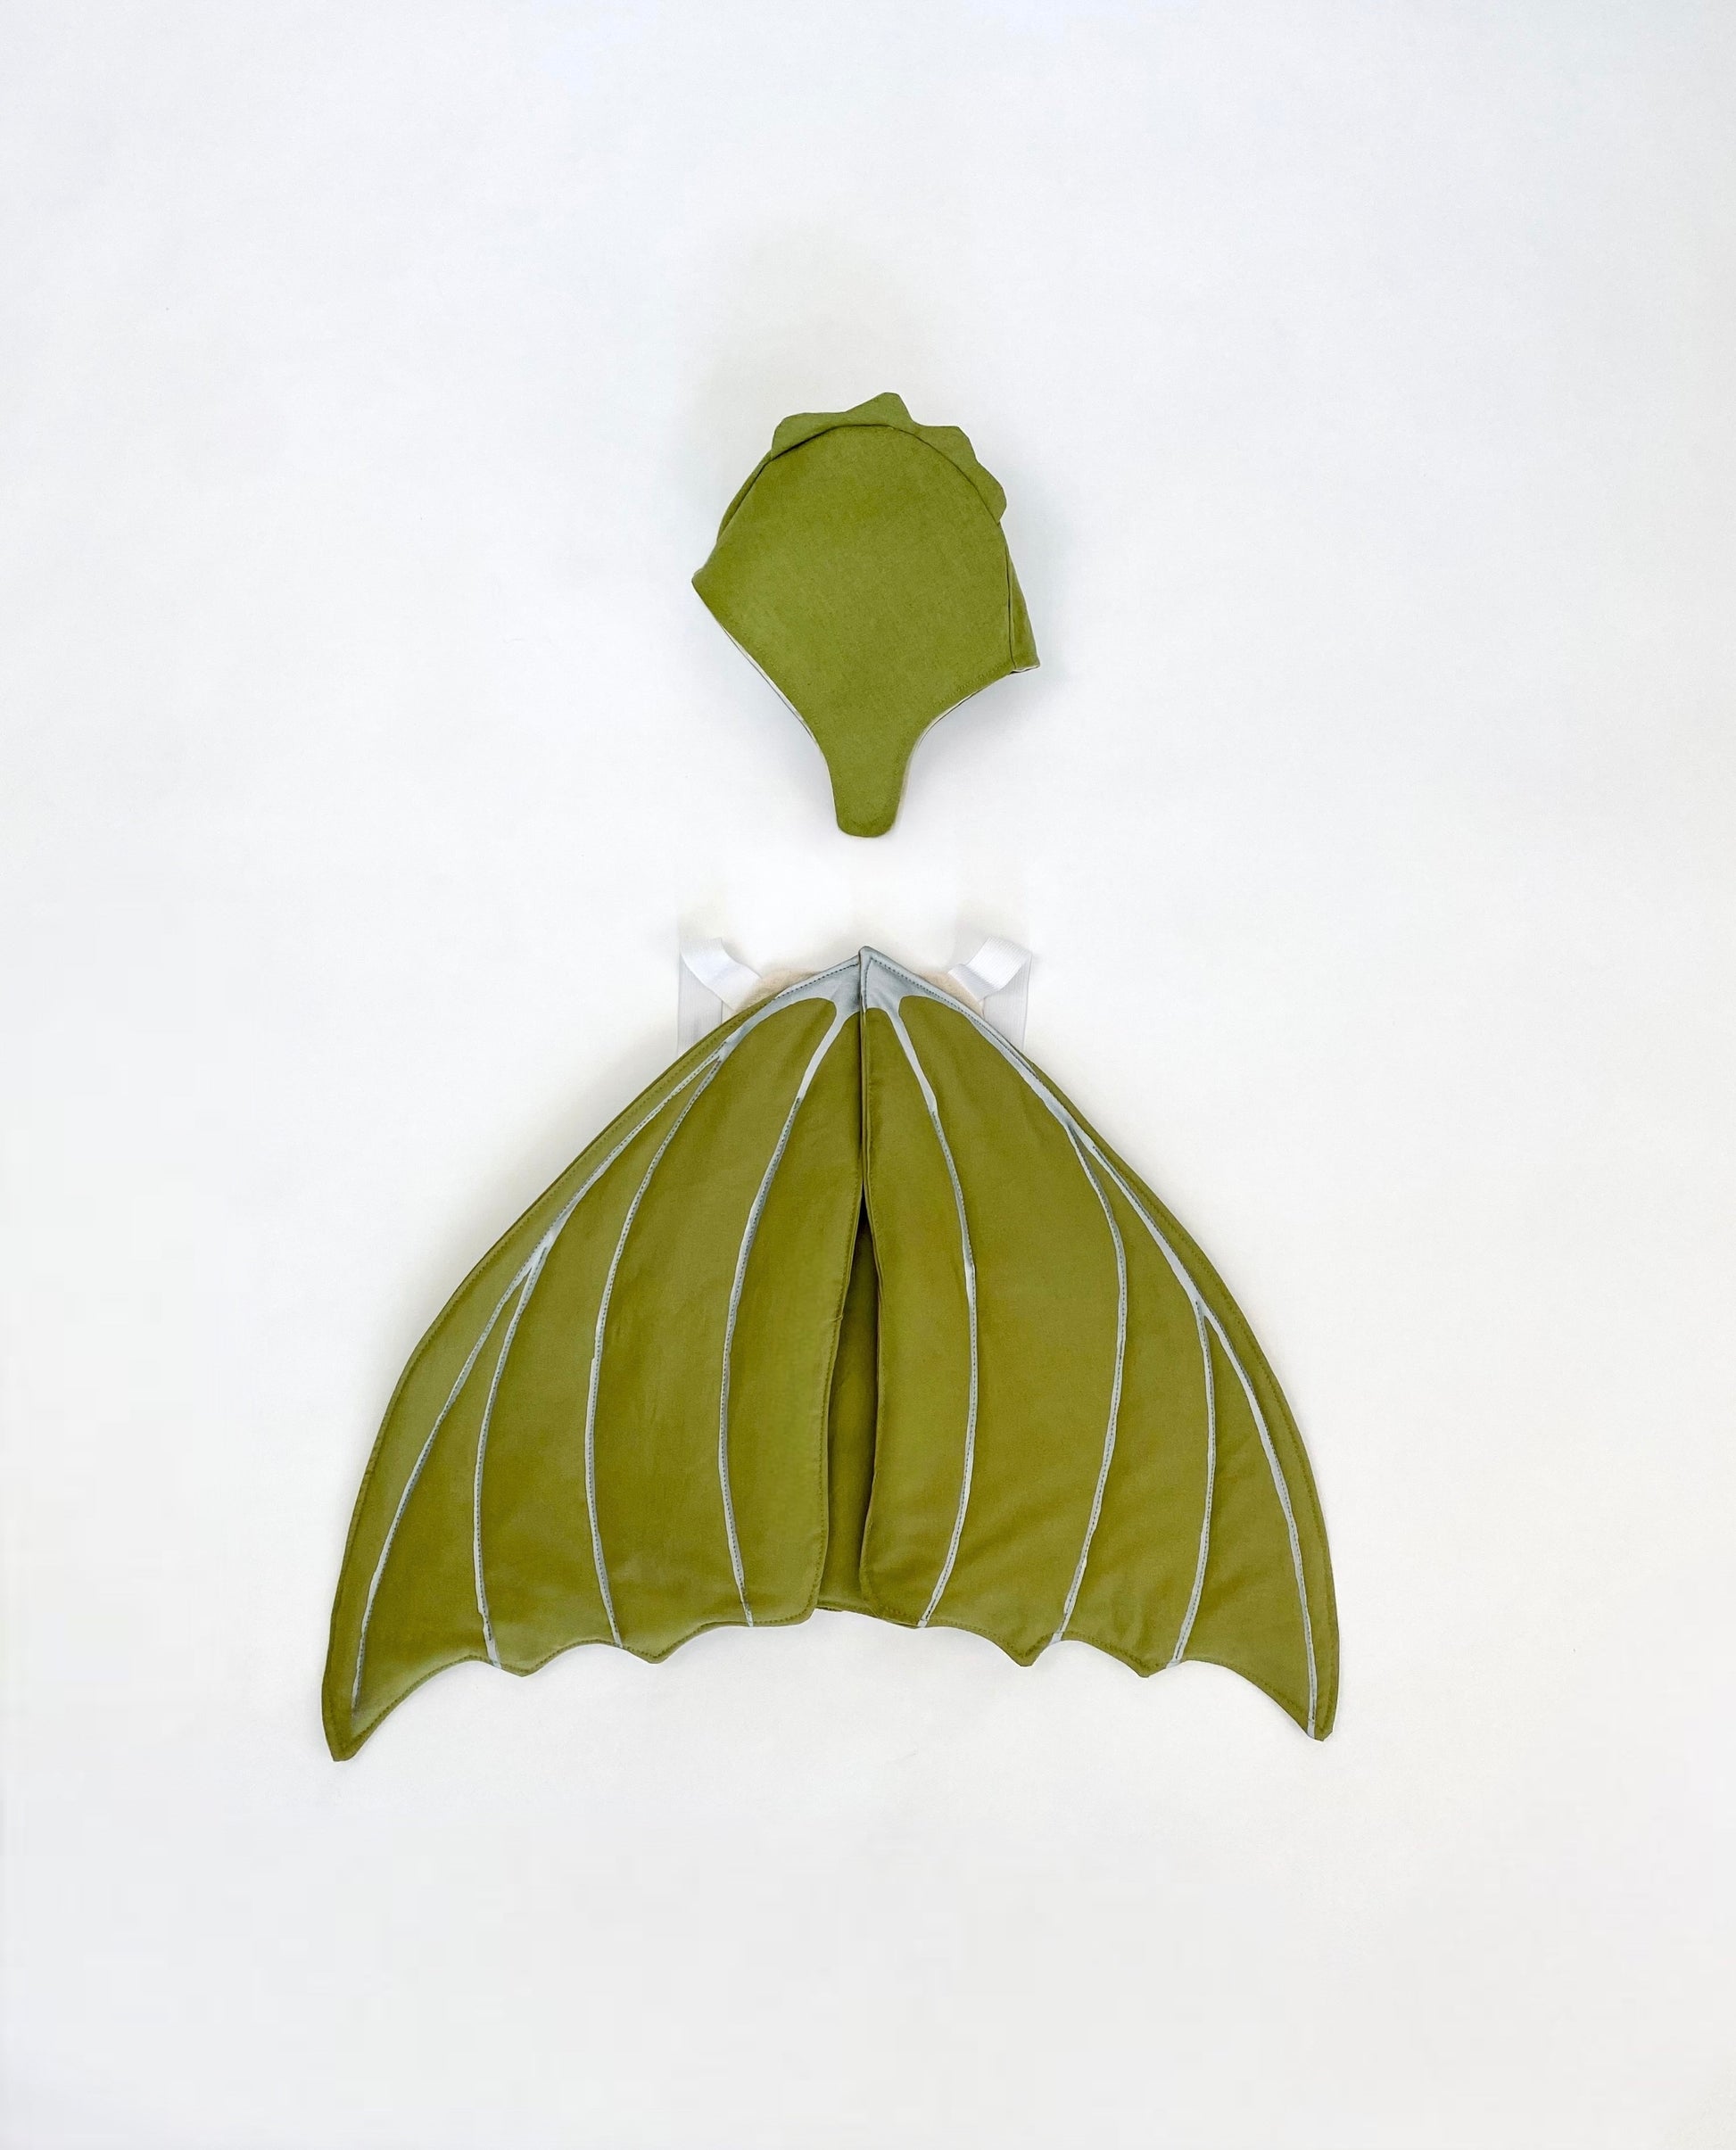 Green dragon costume wings with hat for kids.